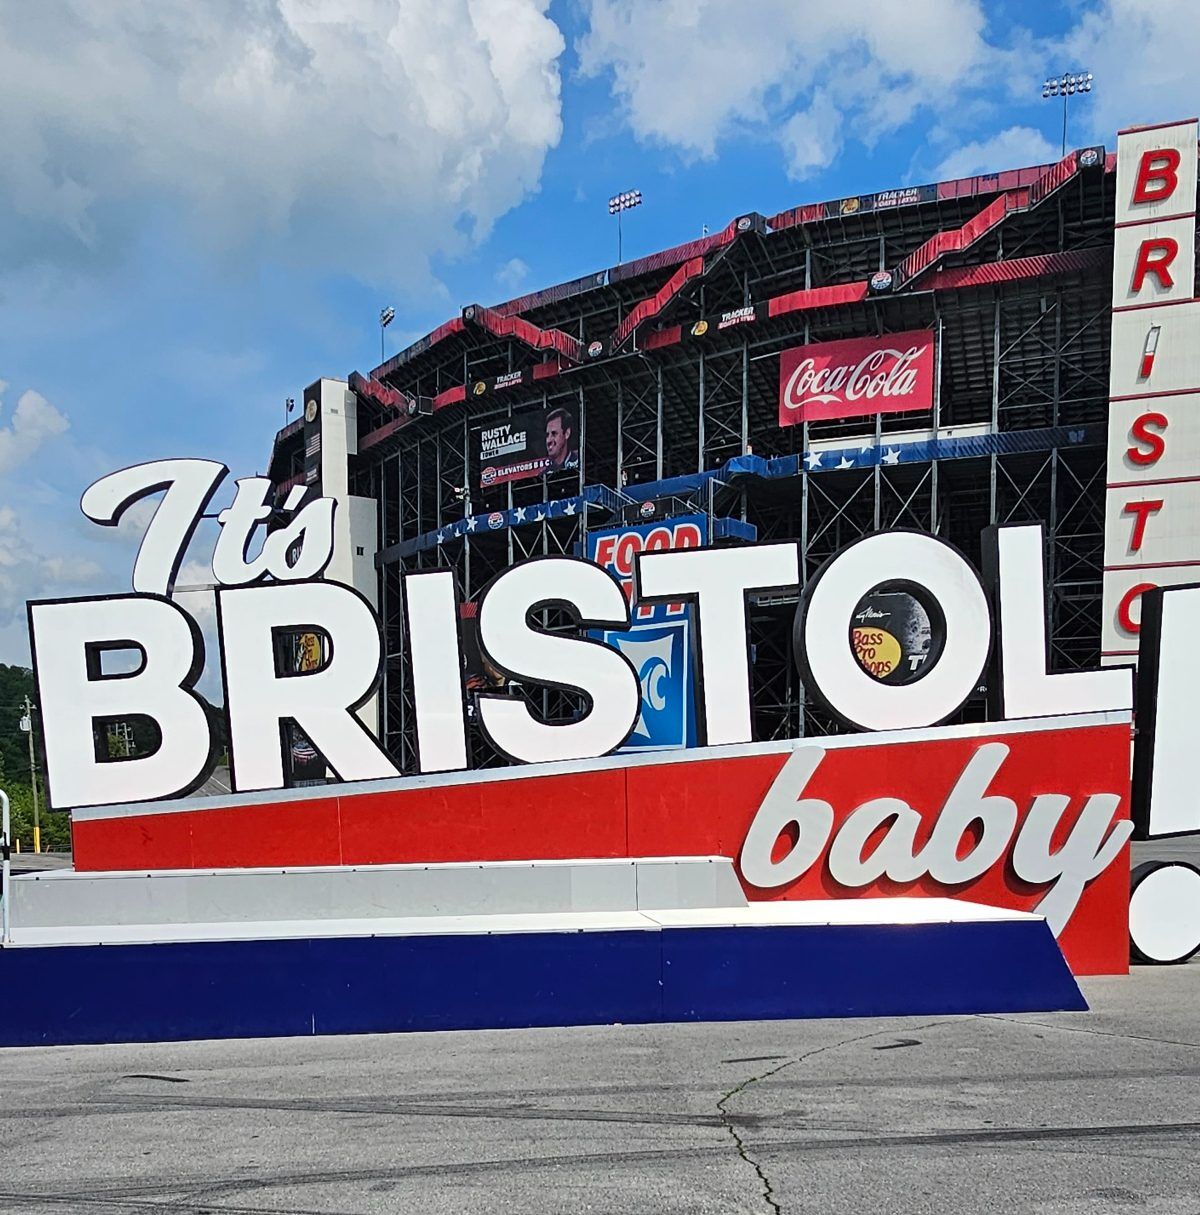 Bristol Motor Speedway, the world's fastest half-mile, is ready for some racing action! The Bristol Motor Speedway sign is a must-have for any NASCAR fan's Instagram feed. Get ready for some excitement at the Bristol Motor Speedway! The Bristol Motor Speedway is the perfect place to catch some NASCAR racing. The Bristol Motor Speedway sign is a great way to show your NASCAR pride.